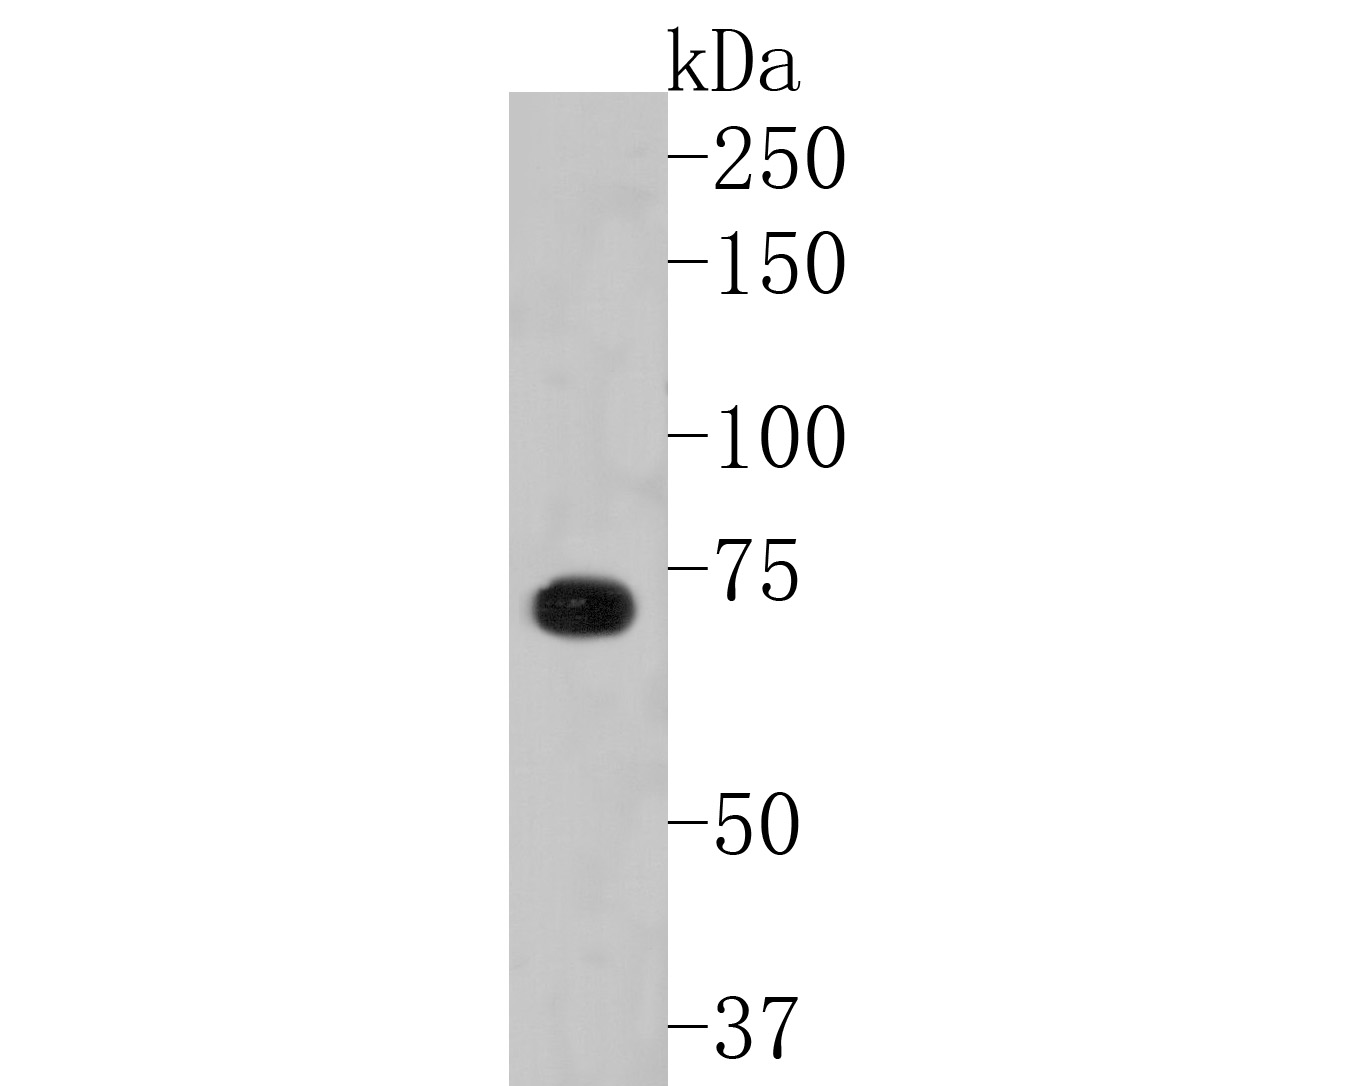 Western blot analysis of p73 on 293 cell lysates. Proteins were transferred to a PVDF membrane and blocked with 5% BSA in PBS for 1 hour at room temperature. The primary antibody (ET1609-80, 1/500) was used in 5% BSA at room temperature for 2 hours. Goat Anti-Rabbit IgG - HRP Secondary Antibody (HA1001) at 1:5,000 dilution was used for 1 hour at room temperature.